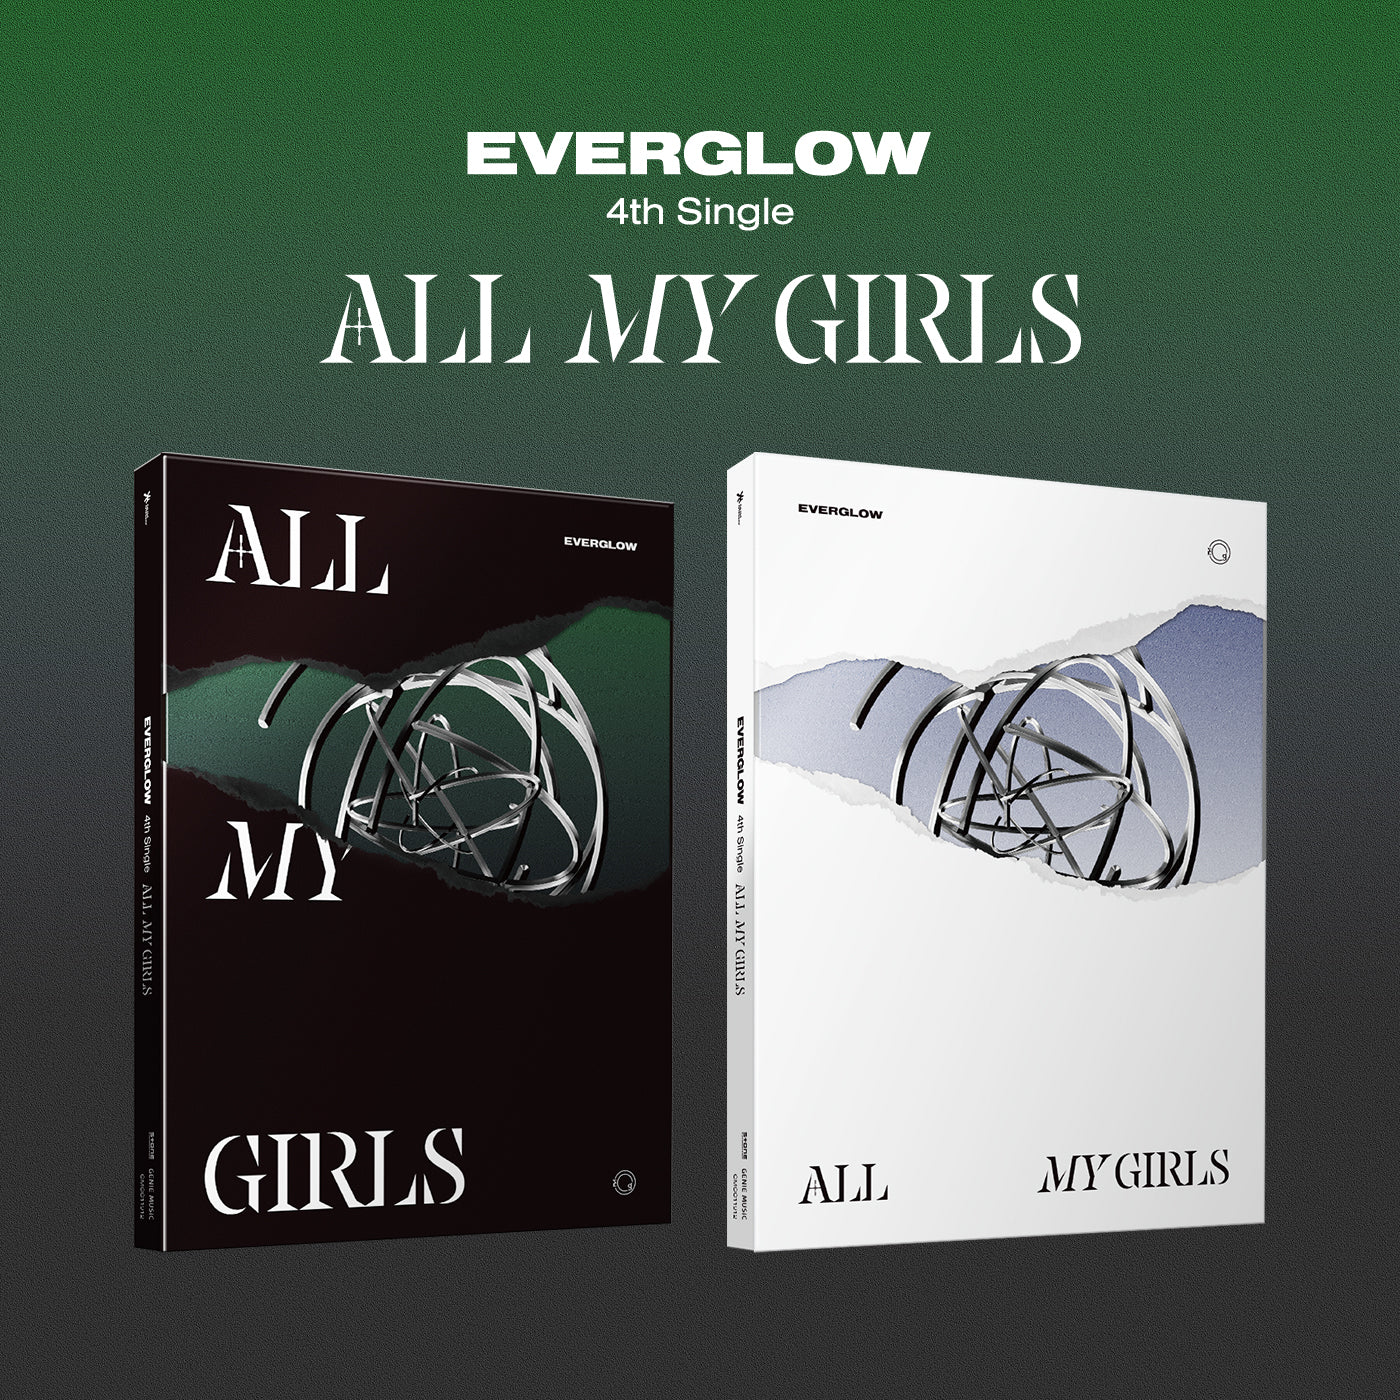 EVERGLOW 4TH SINGLE ALBUM 'ALL MY GIRLS' SET COVER